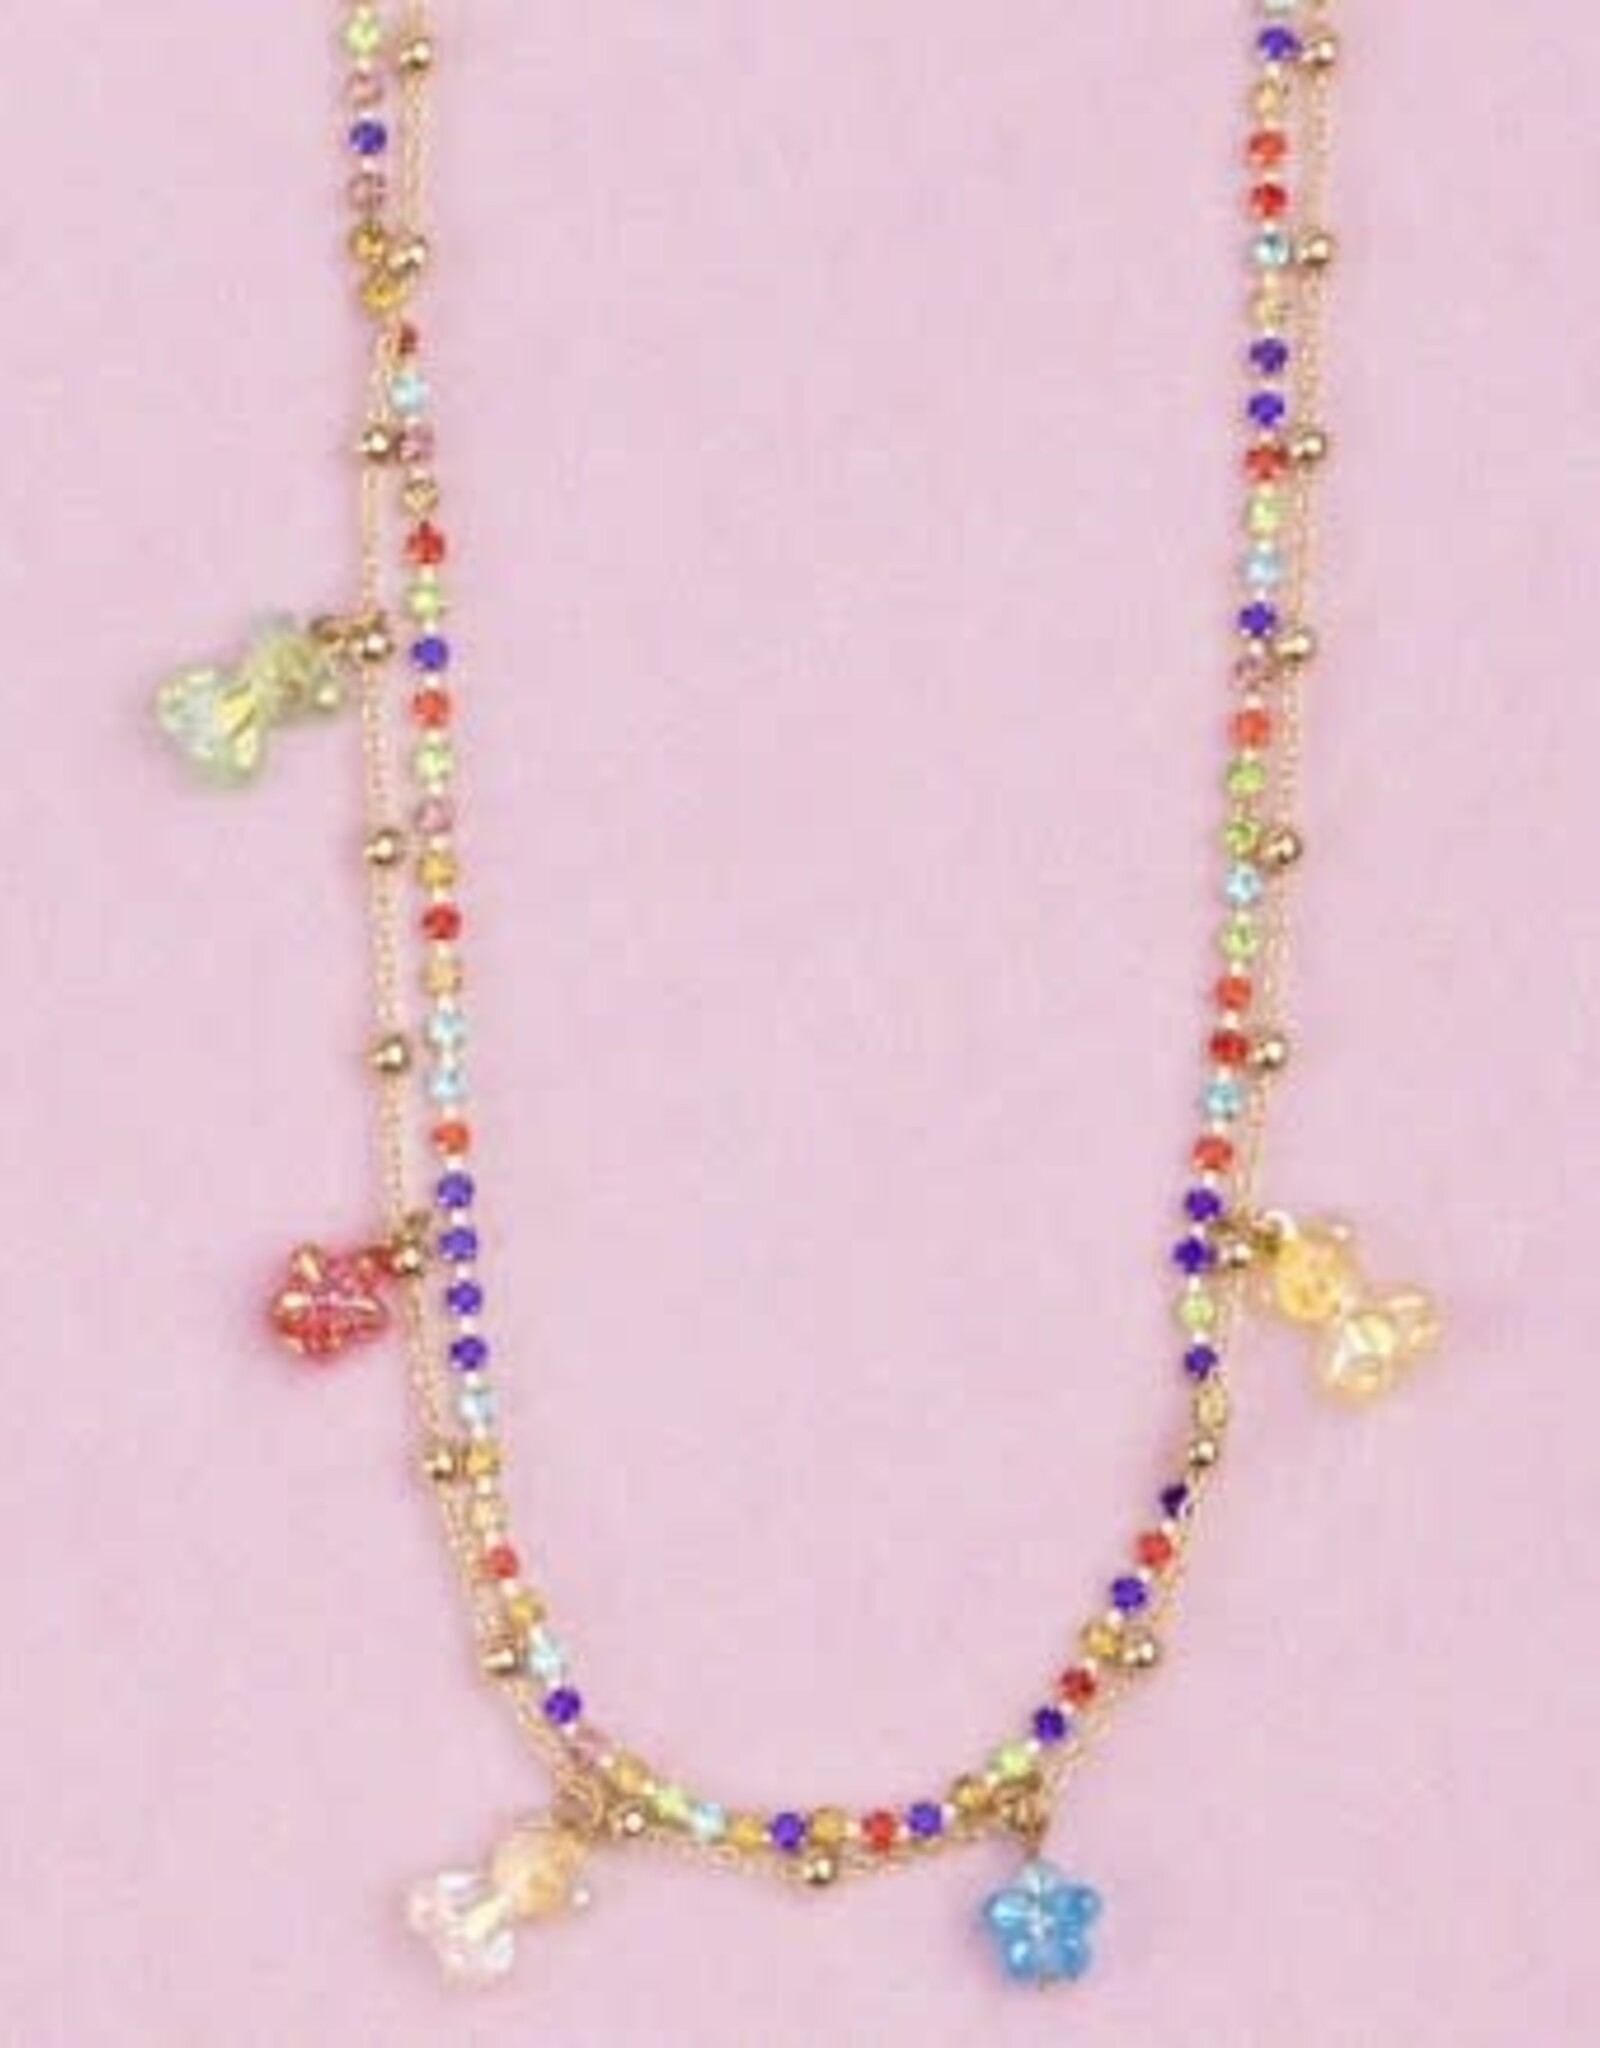 Great Pretenders Boutique Chic Gummy Glam Necklace